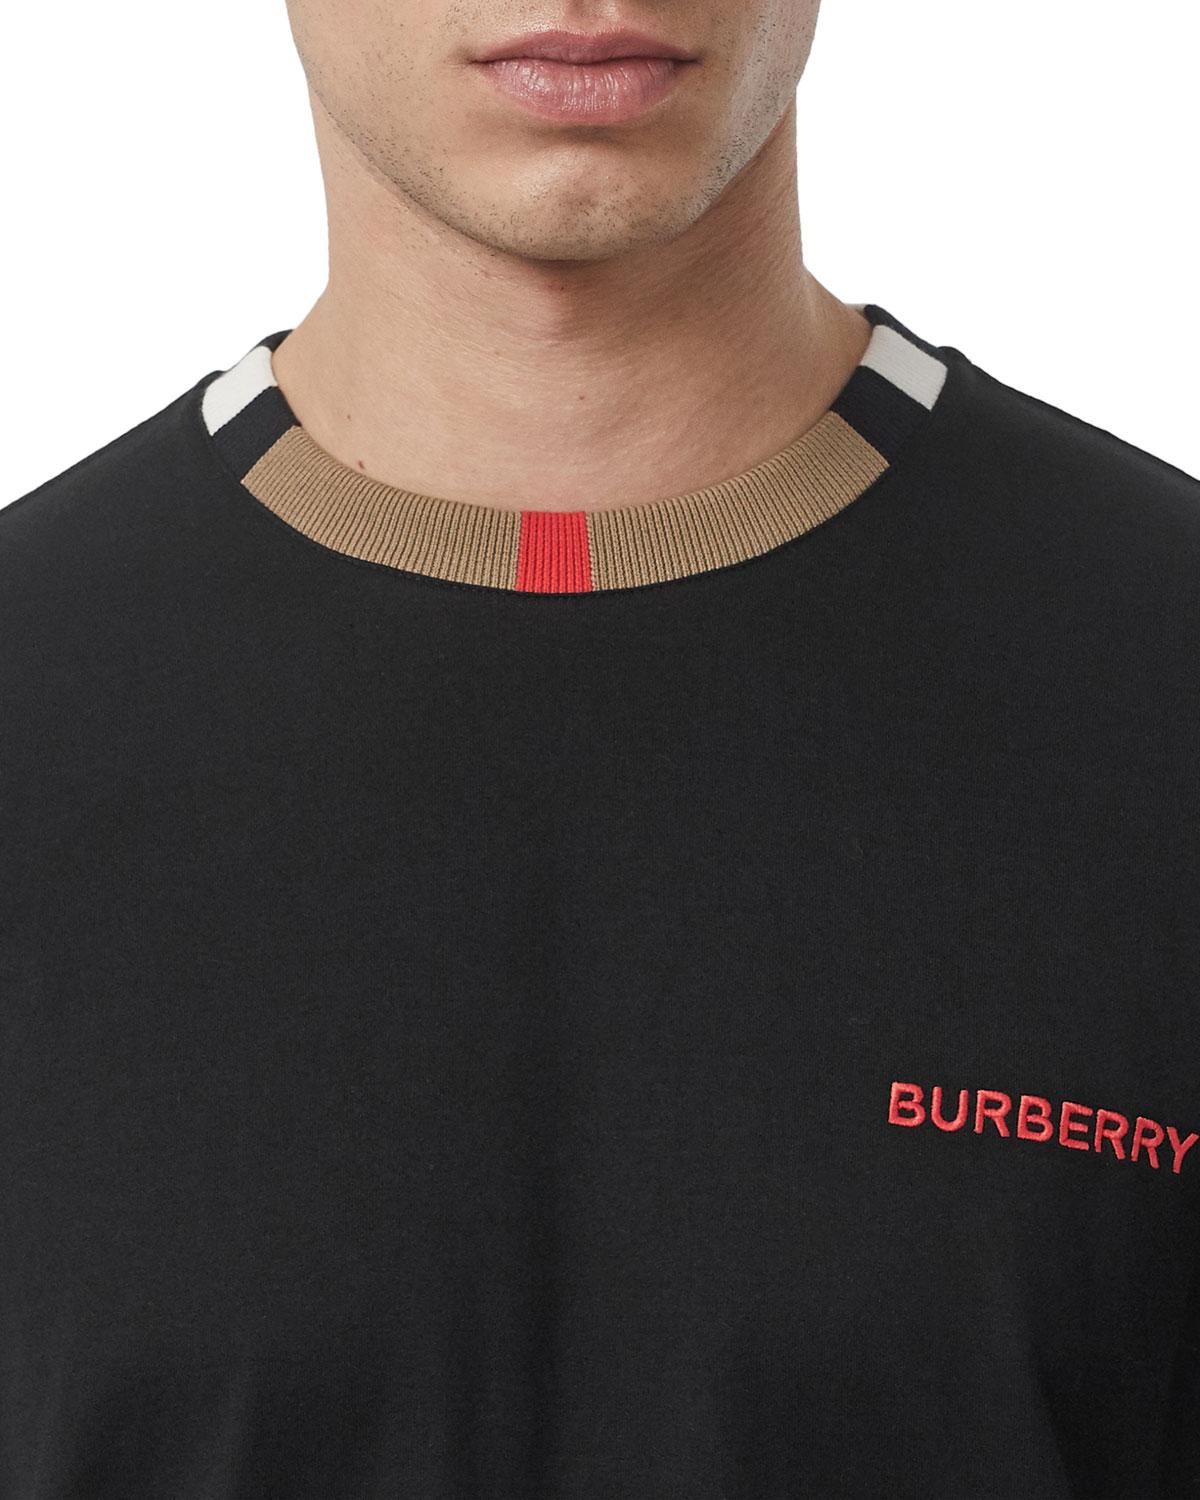 burberry t shirt for mens > Clearance shop